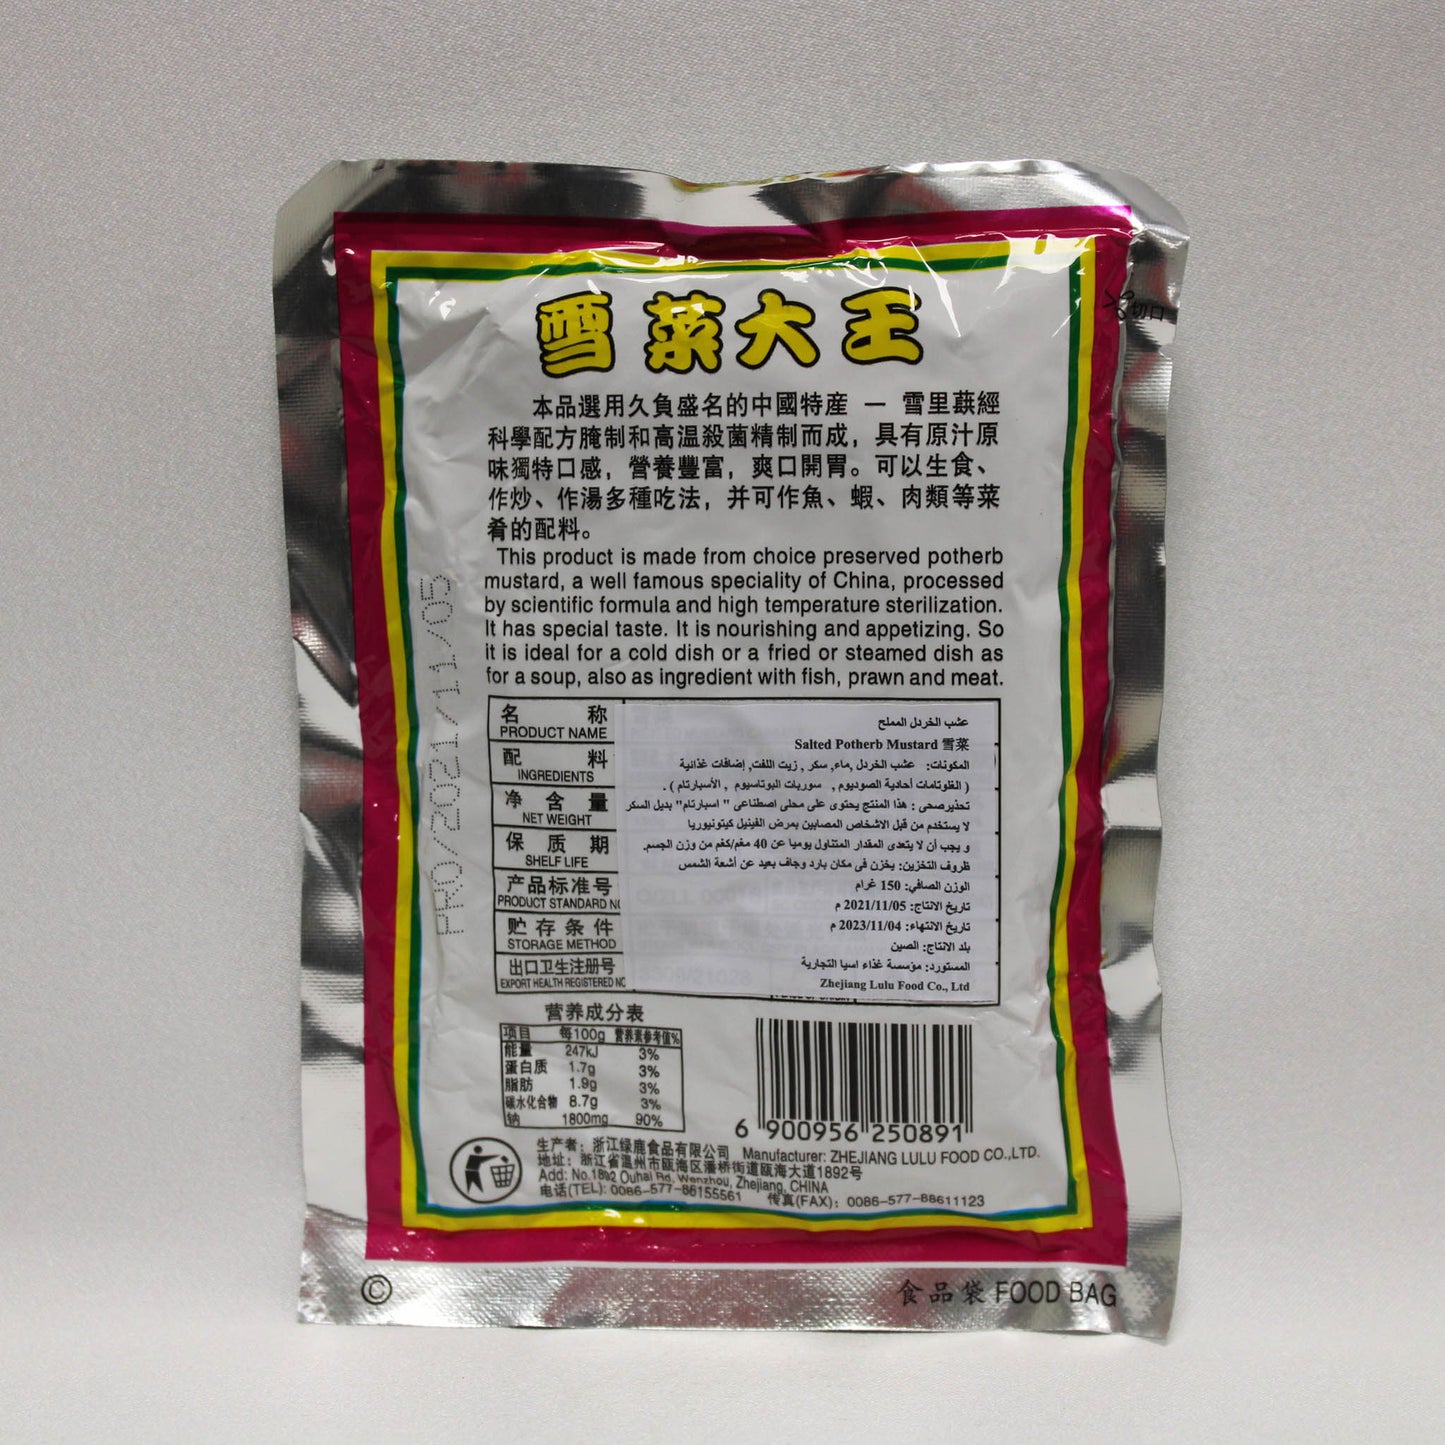 SALTED POTHERB MUSTARD (150gm*100)